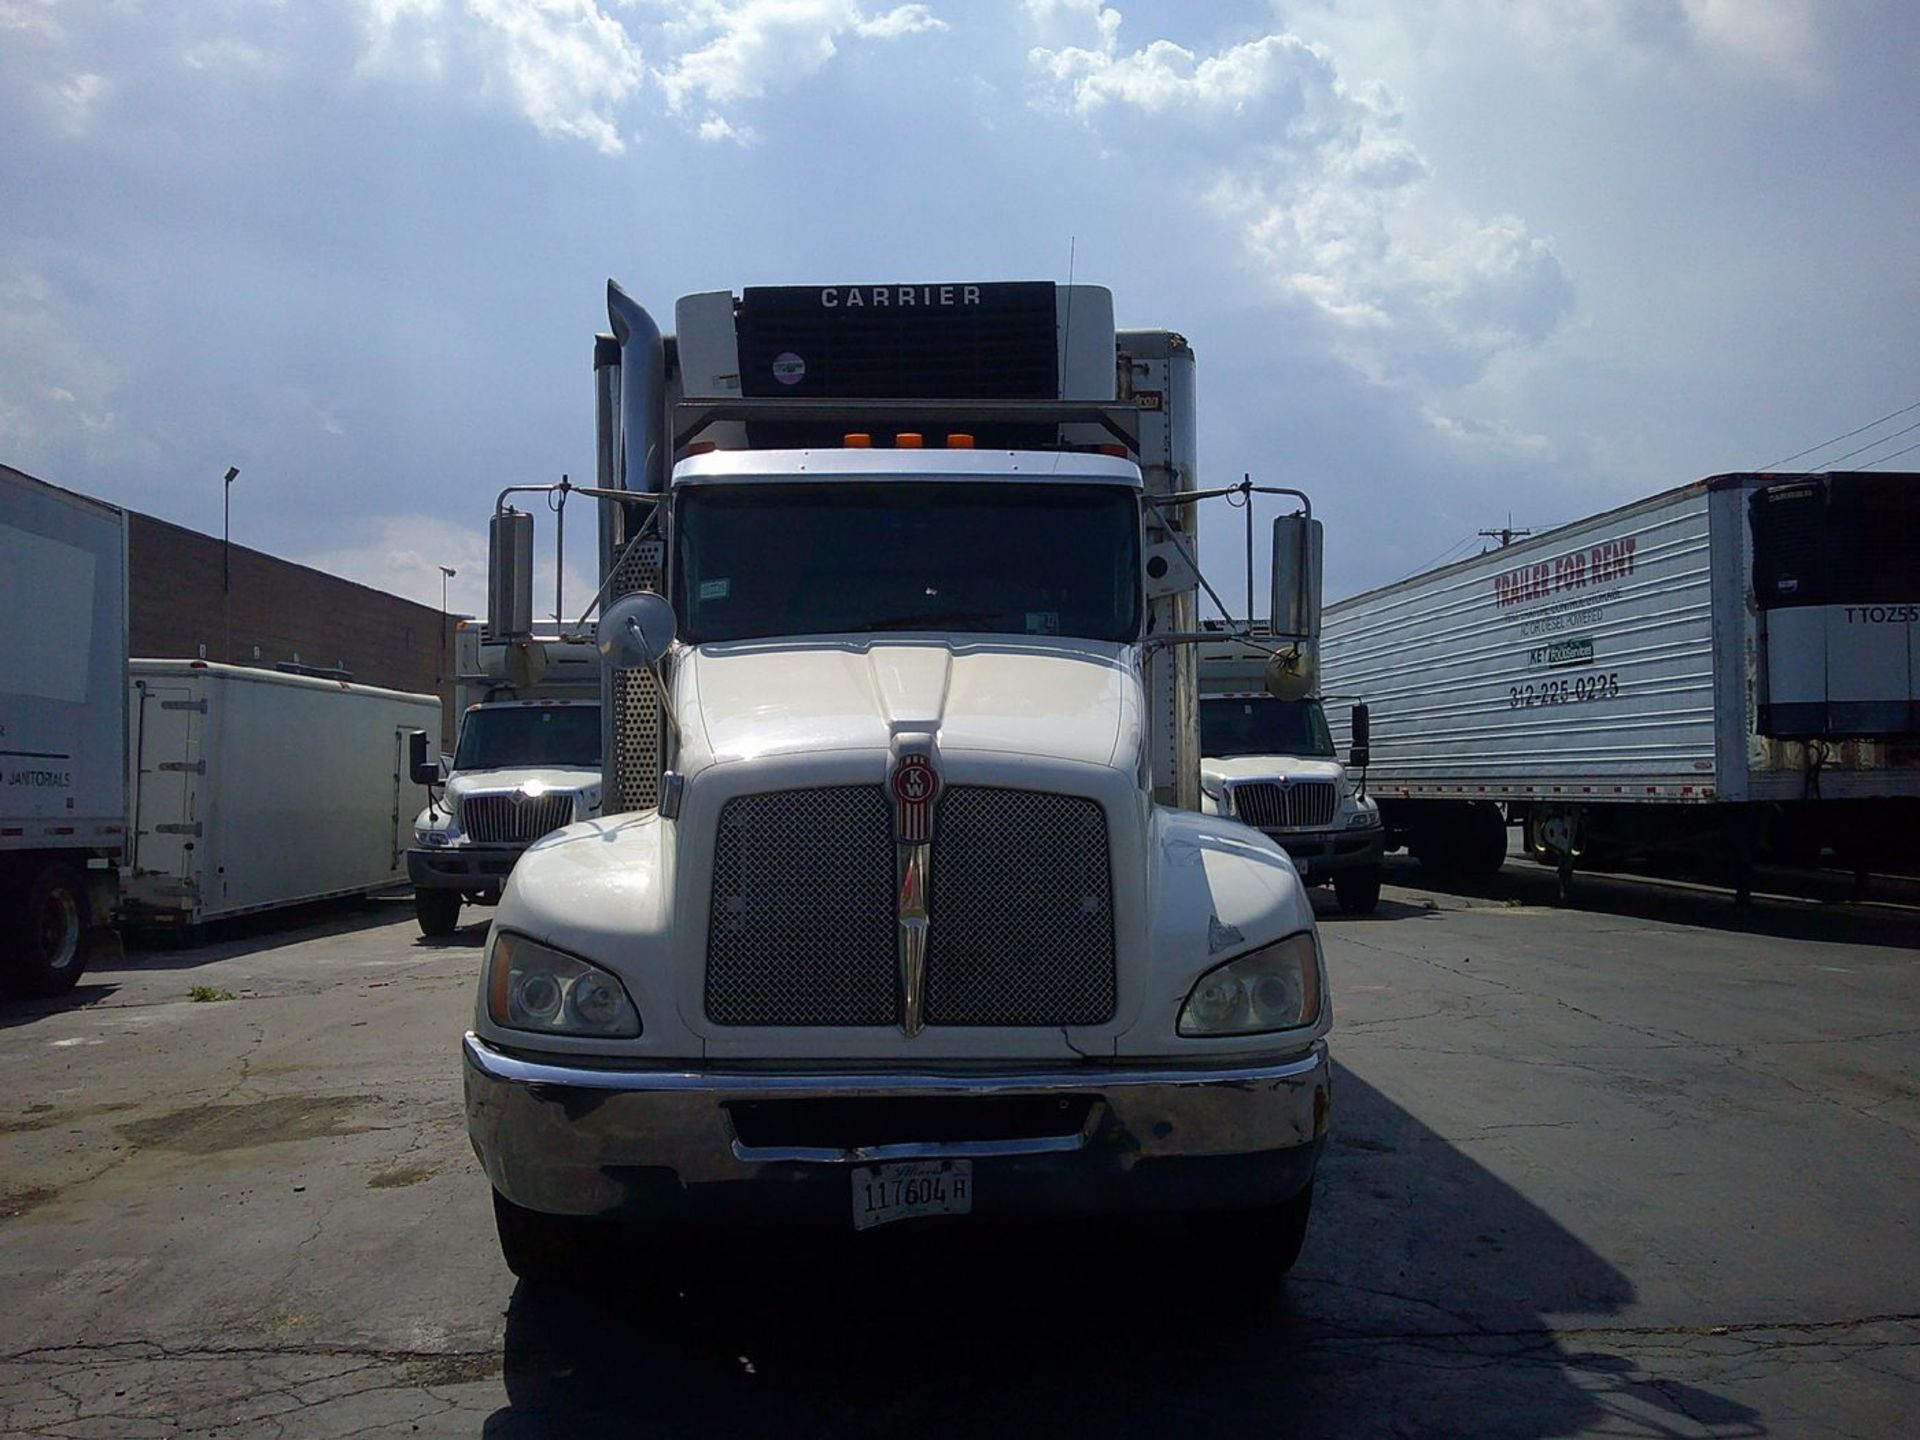 2008 Kenworth 24 ft. Model T270 Single Axle Refrigerated Box Truck, VIN: 2NKMHN6XX8M234154; with - Image 3 of 9